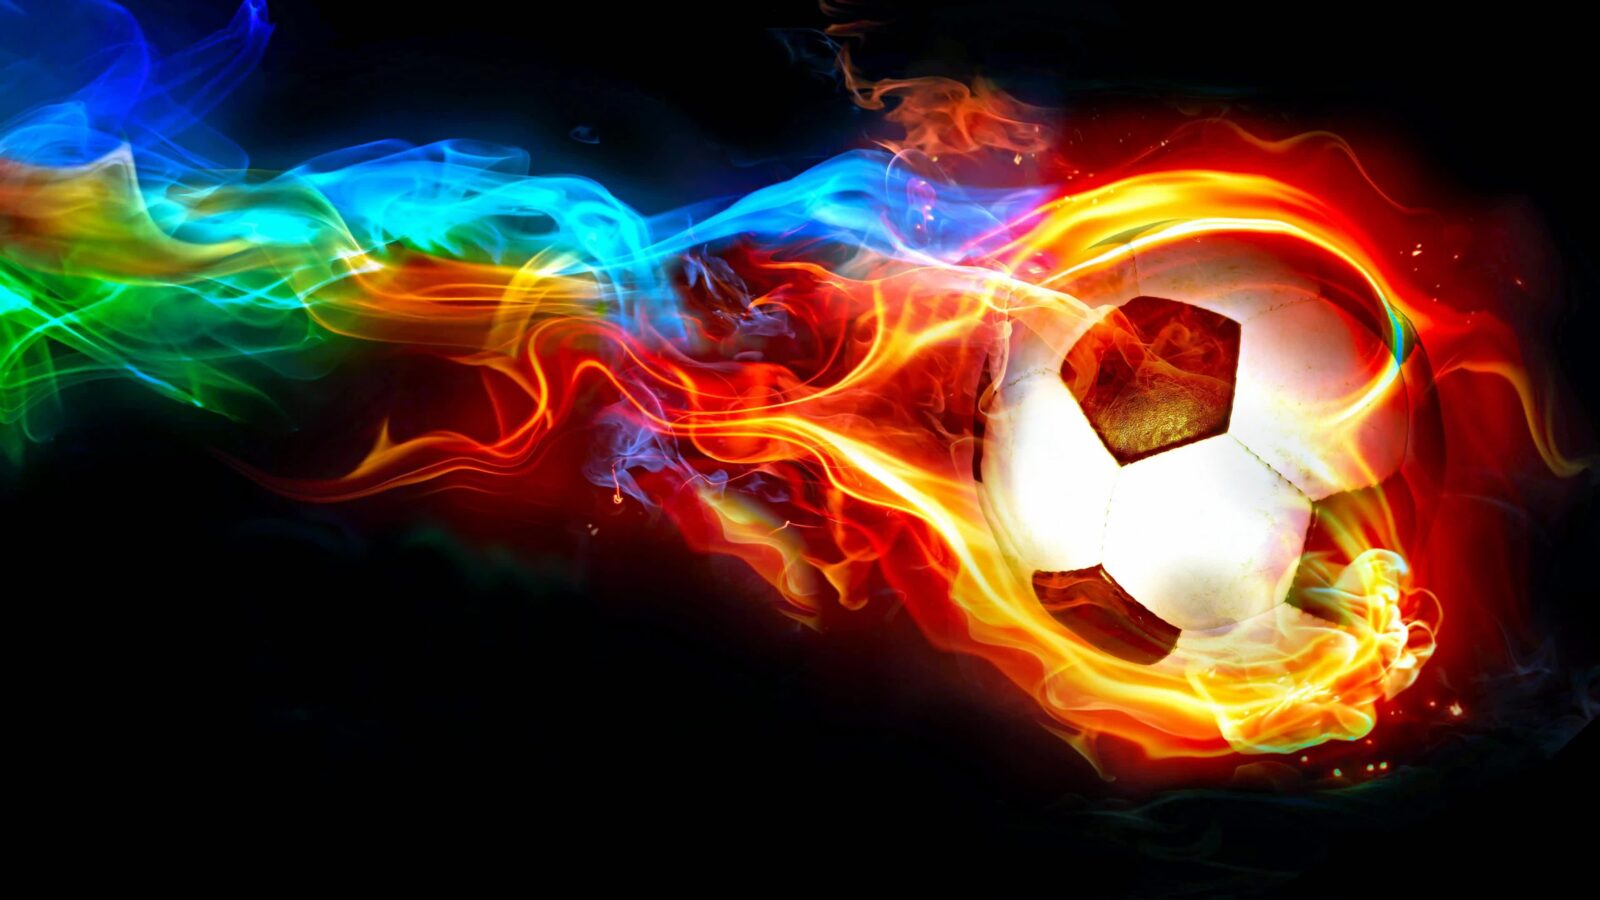 Fifa Football Artwork Abstract 4K Quality - Free Live Wallpaper - Live